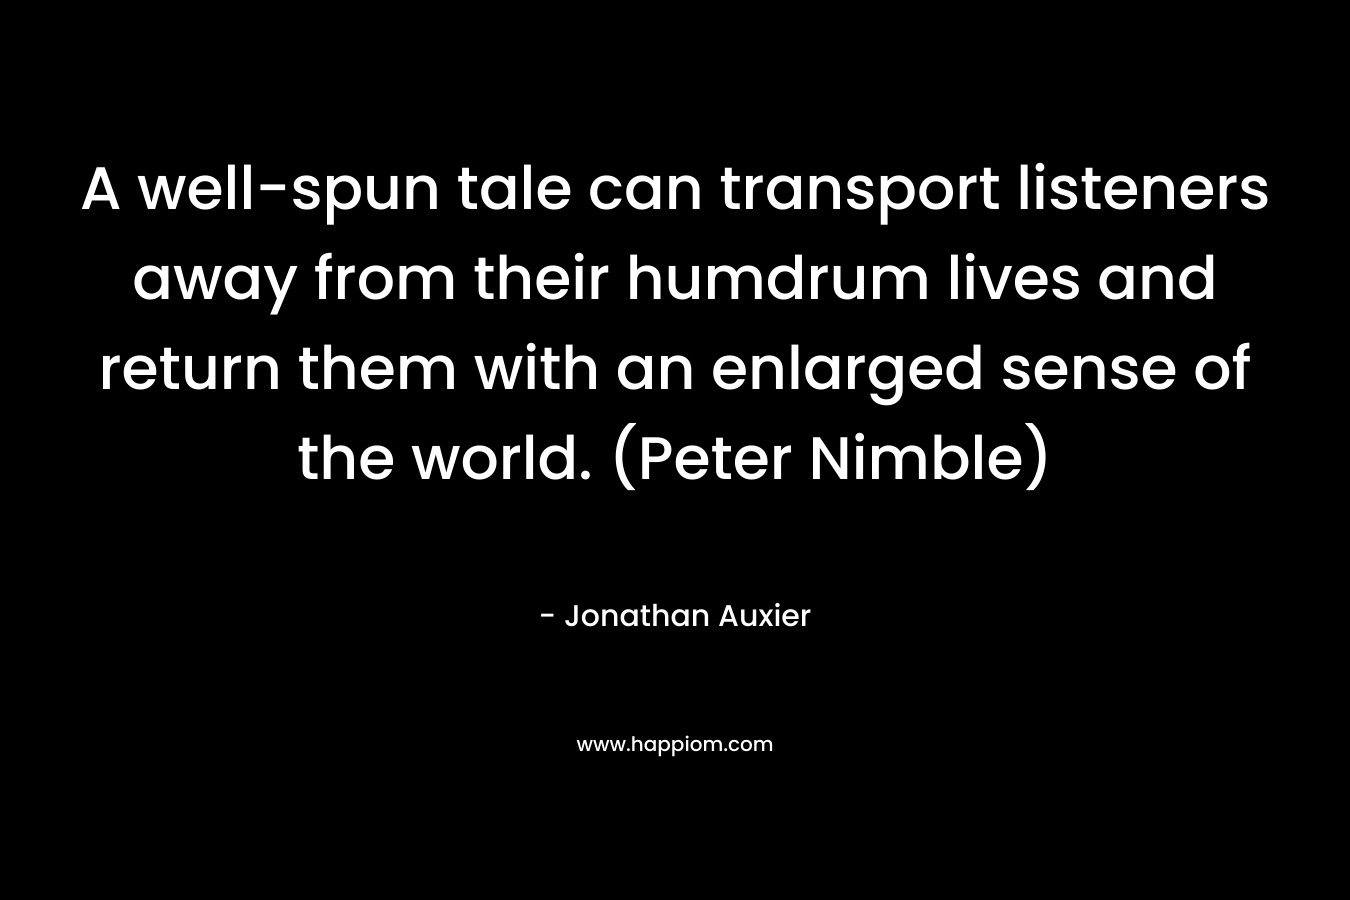 A well-spun tale can transport listeners away from their humdrum lives and return them with an enlarged sense of the world. (Peter Nimble) – Jonathan Auxier